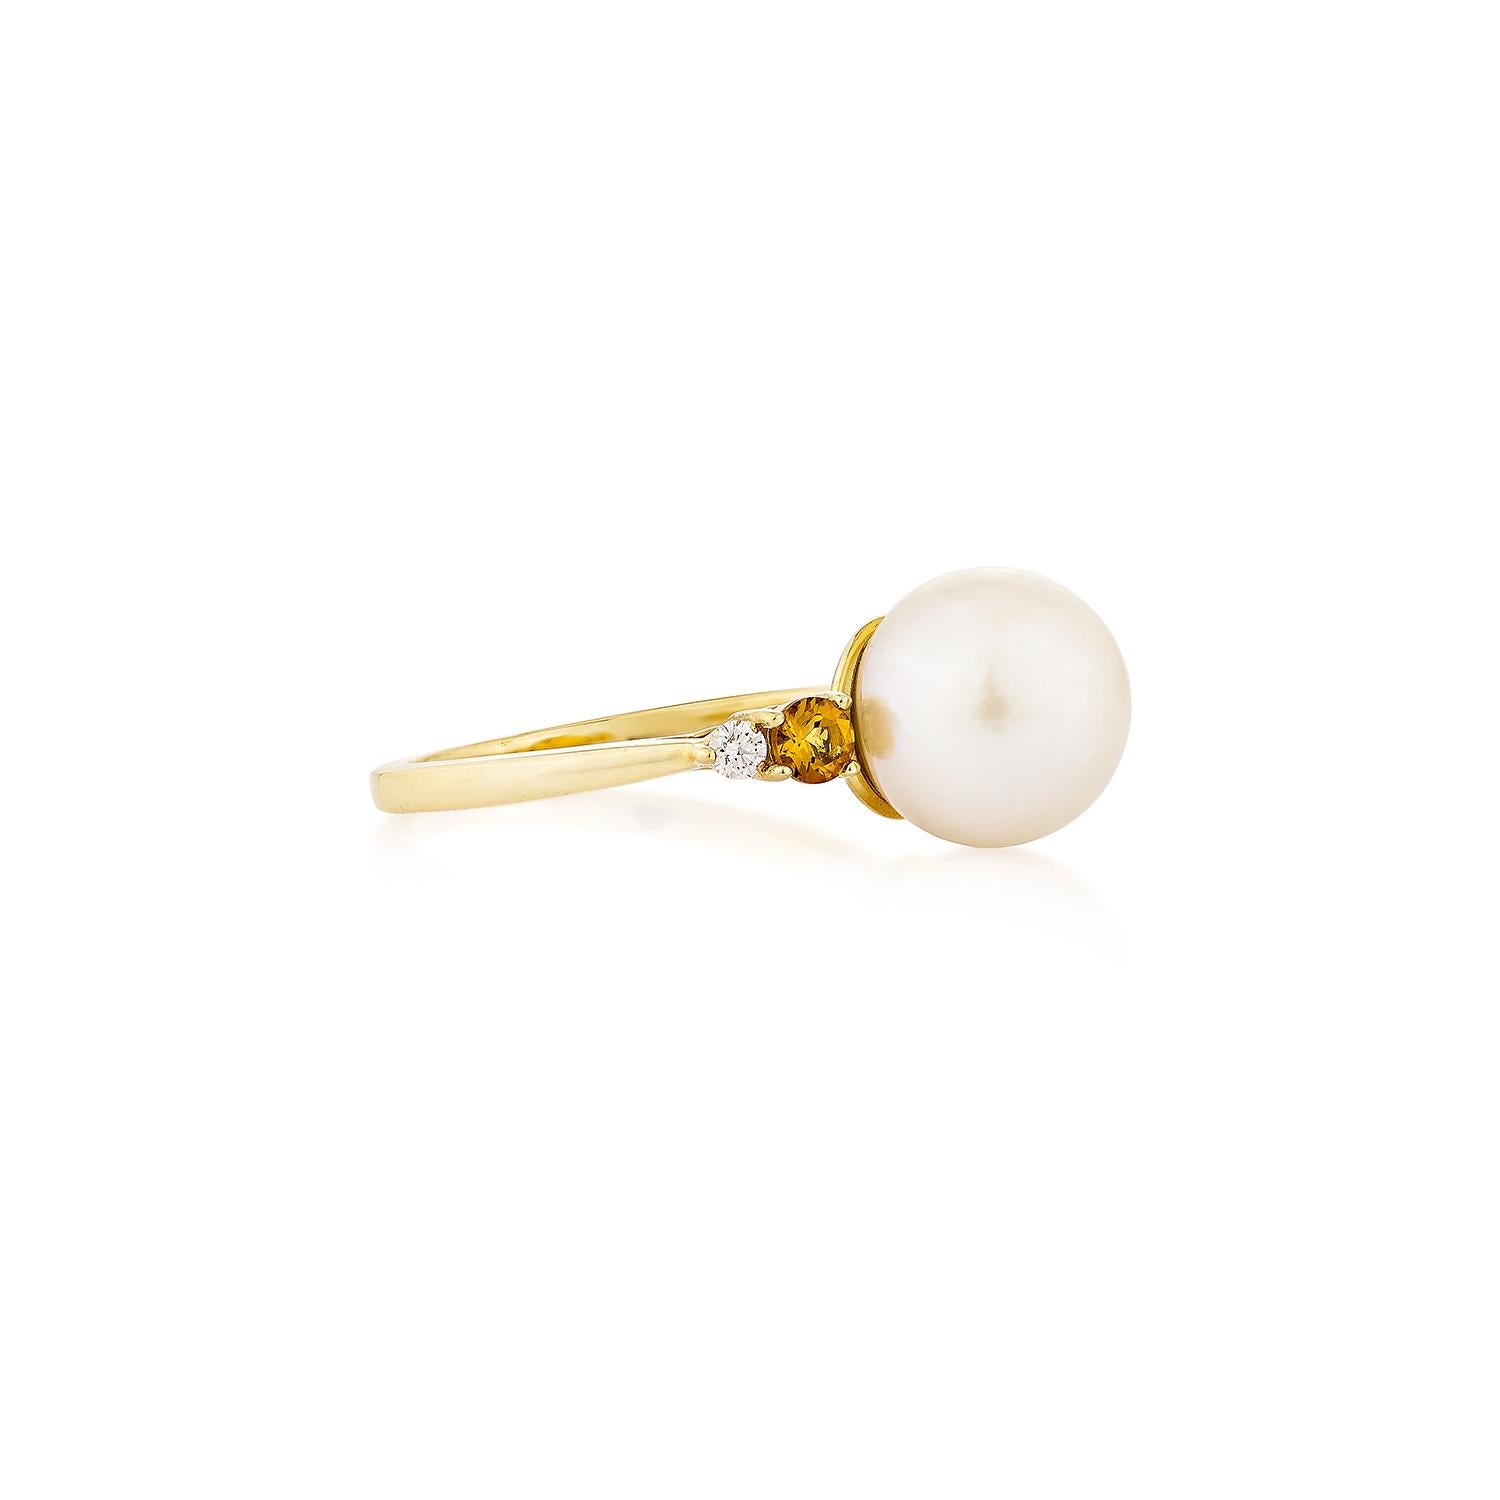 Presented A lovely White pearl and Citrine Fancy Ring is perfect for people who value quality and want to wear it to any occasion or celebration. The yellow gold White pearl ring adorned with Citrine and White diamond offer a classic yet elegant